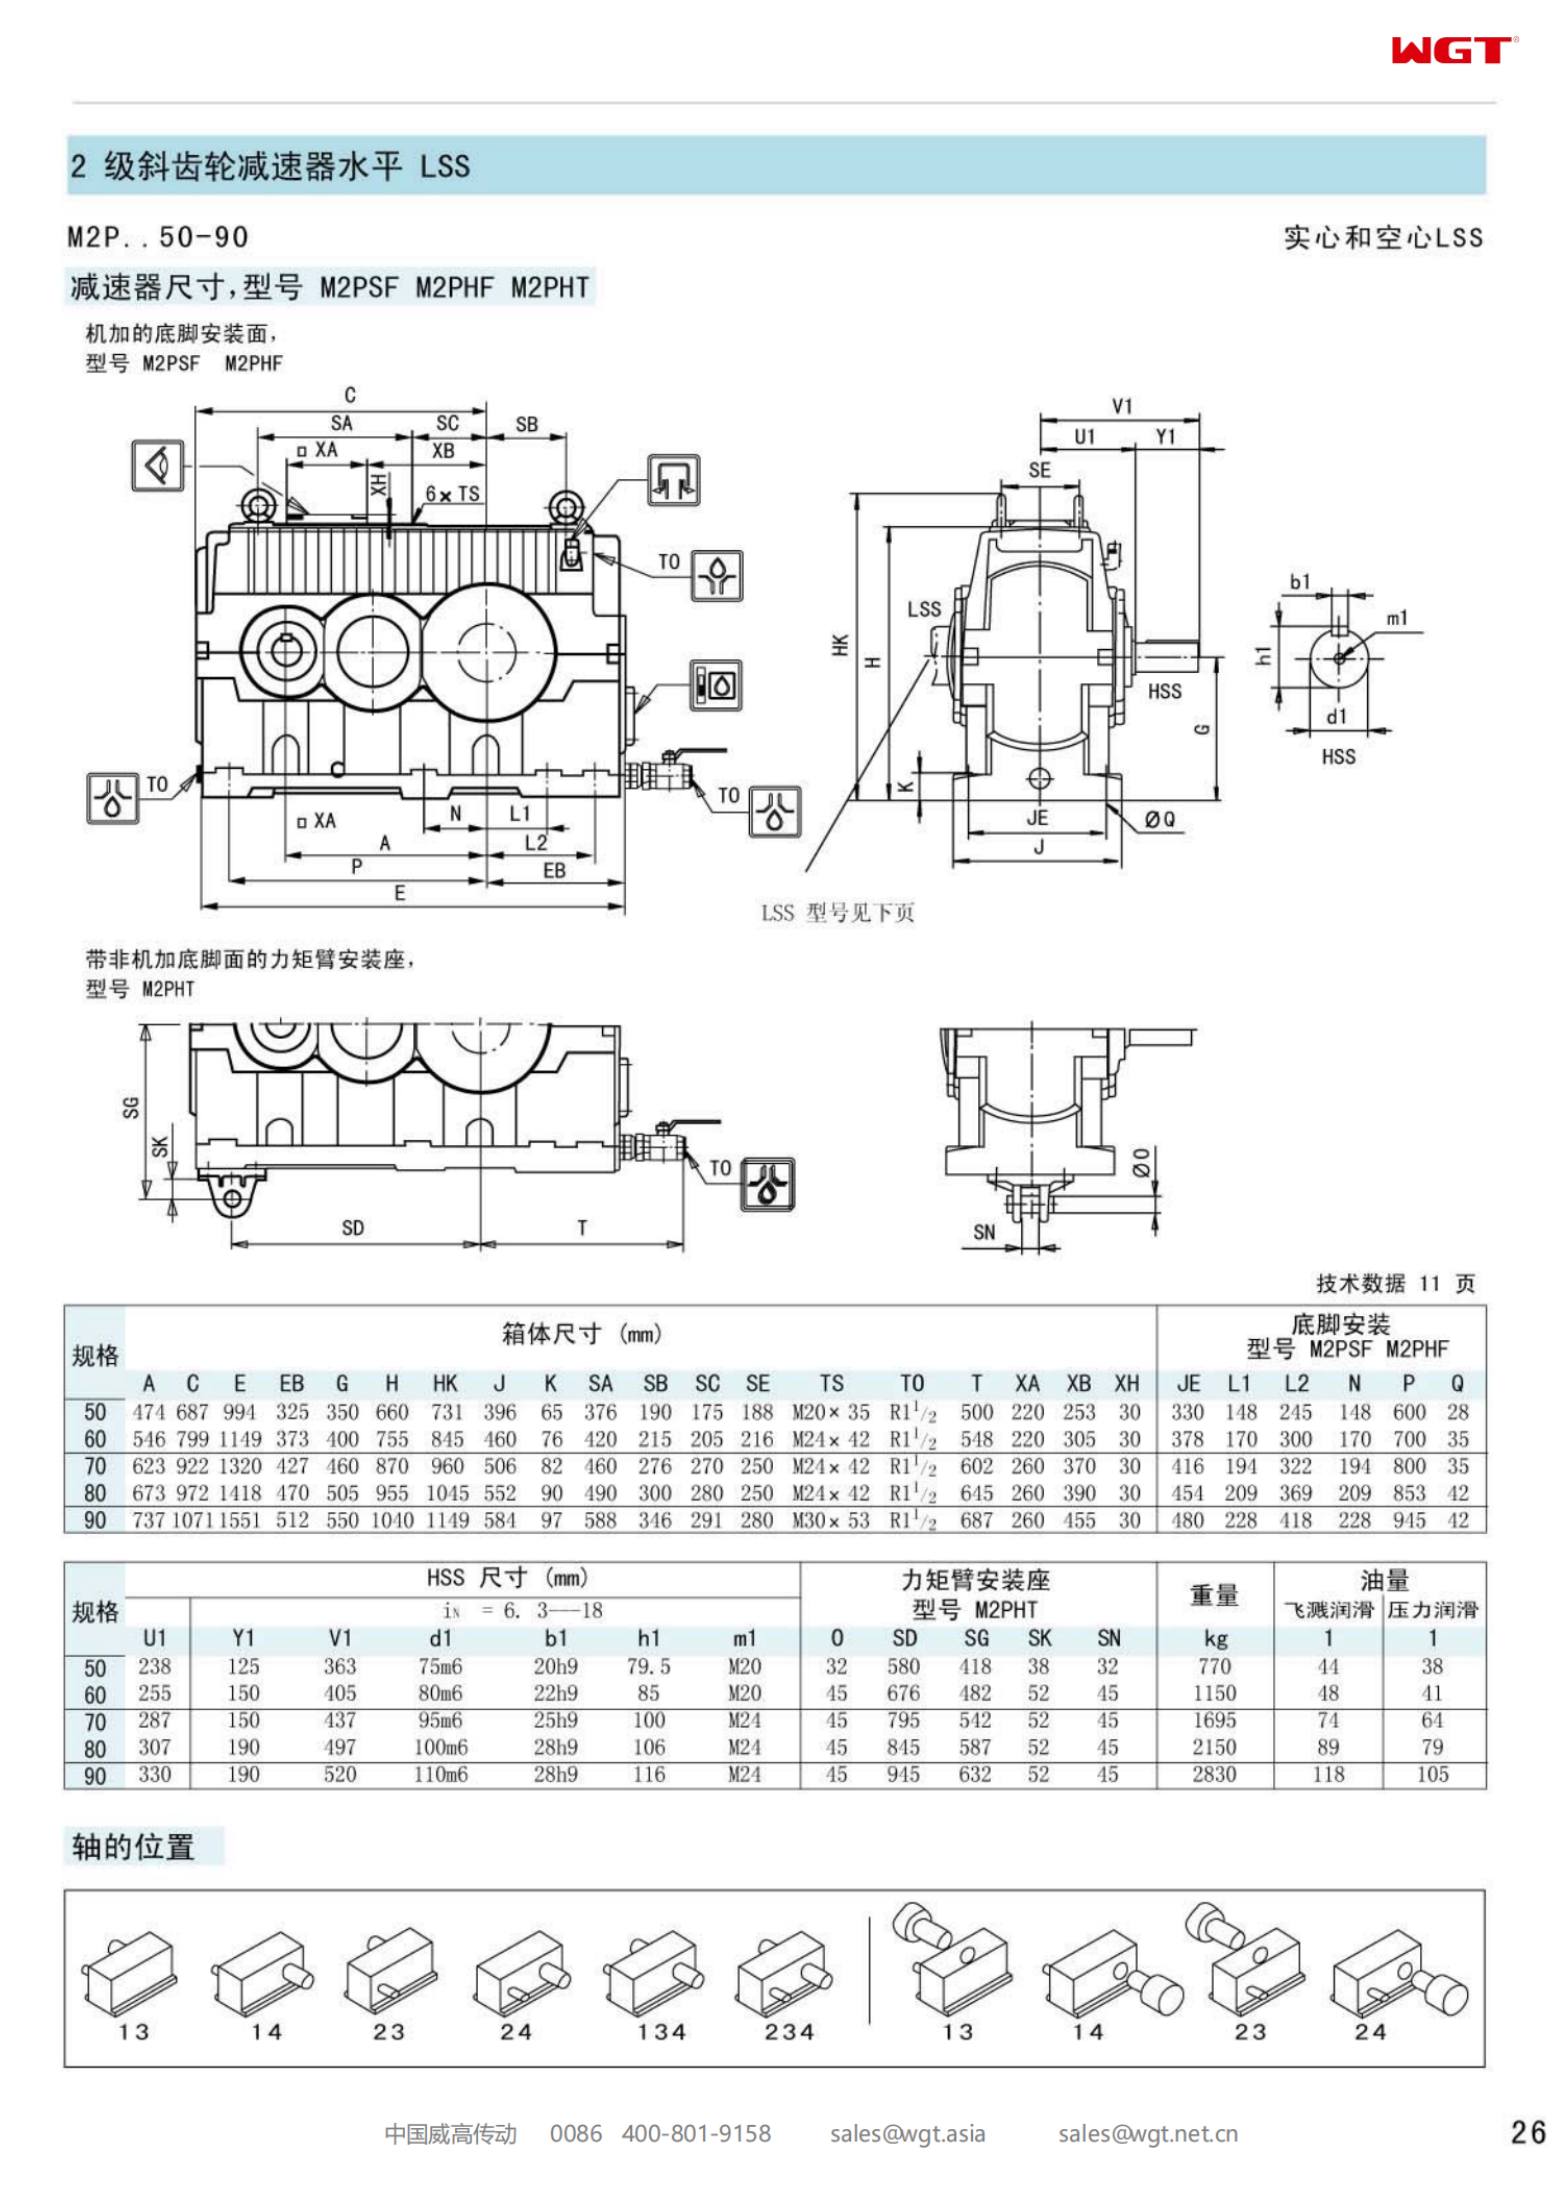 M2PHT60 Replace_SEW_M_Series Gearbox